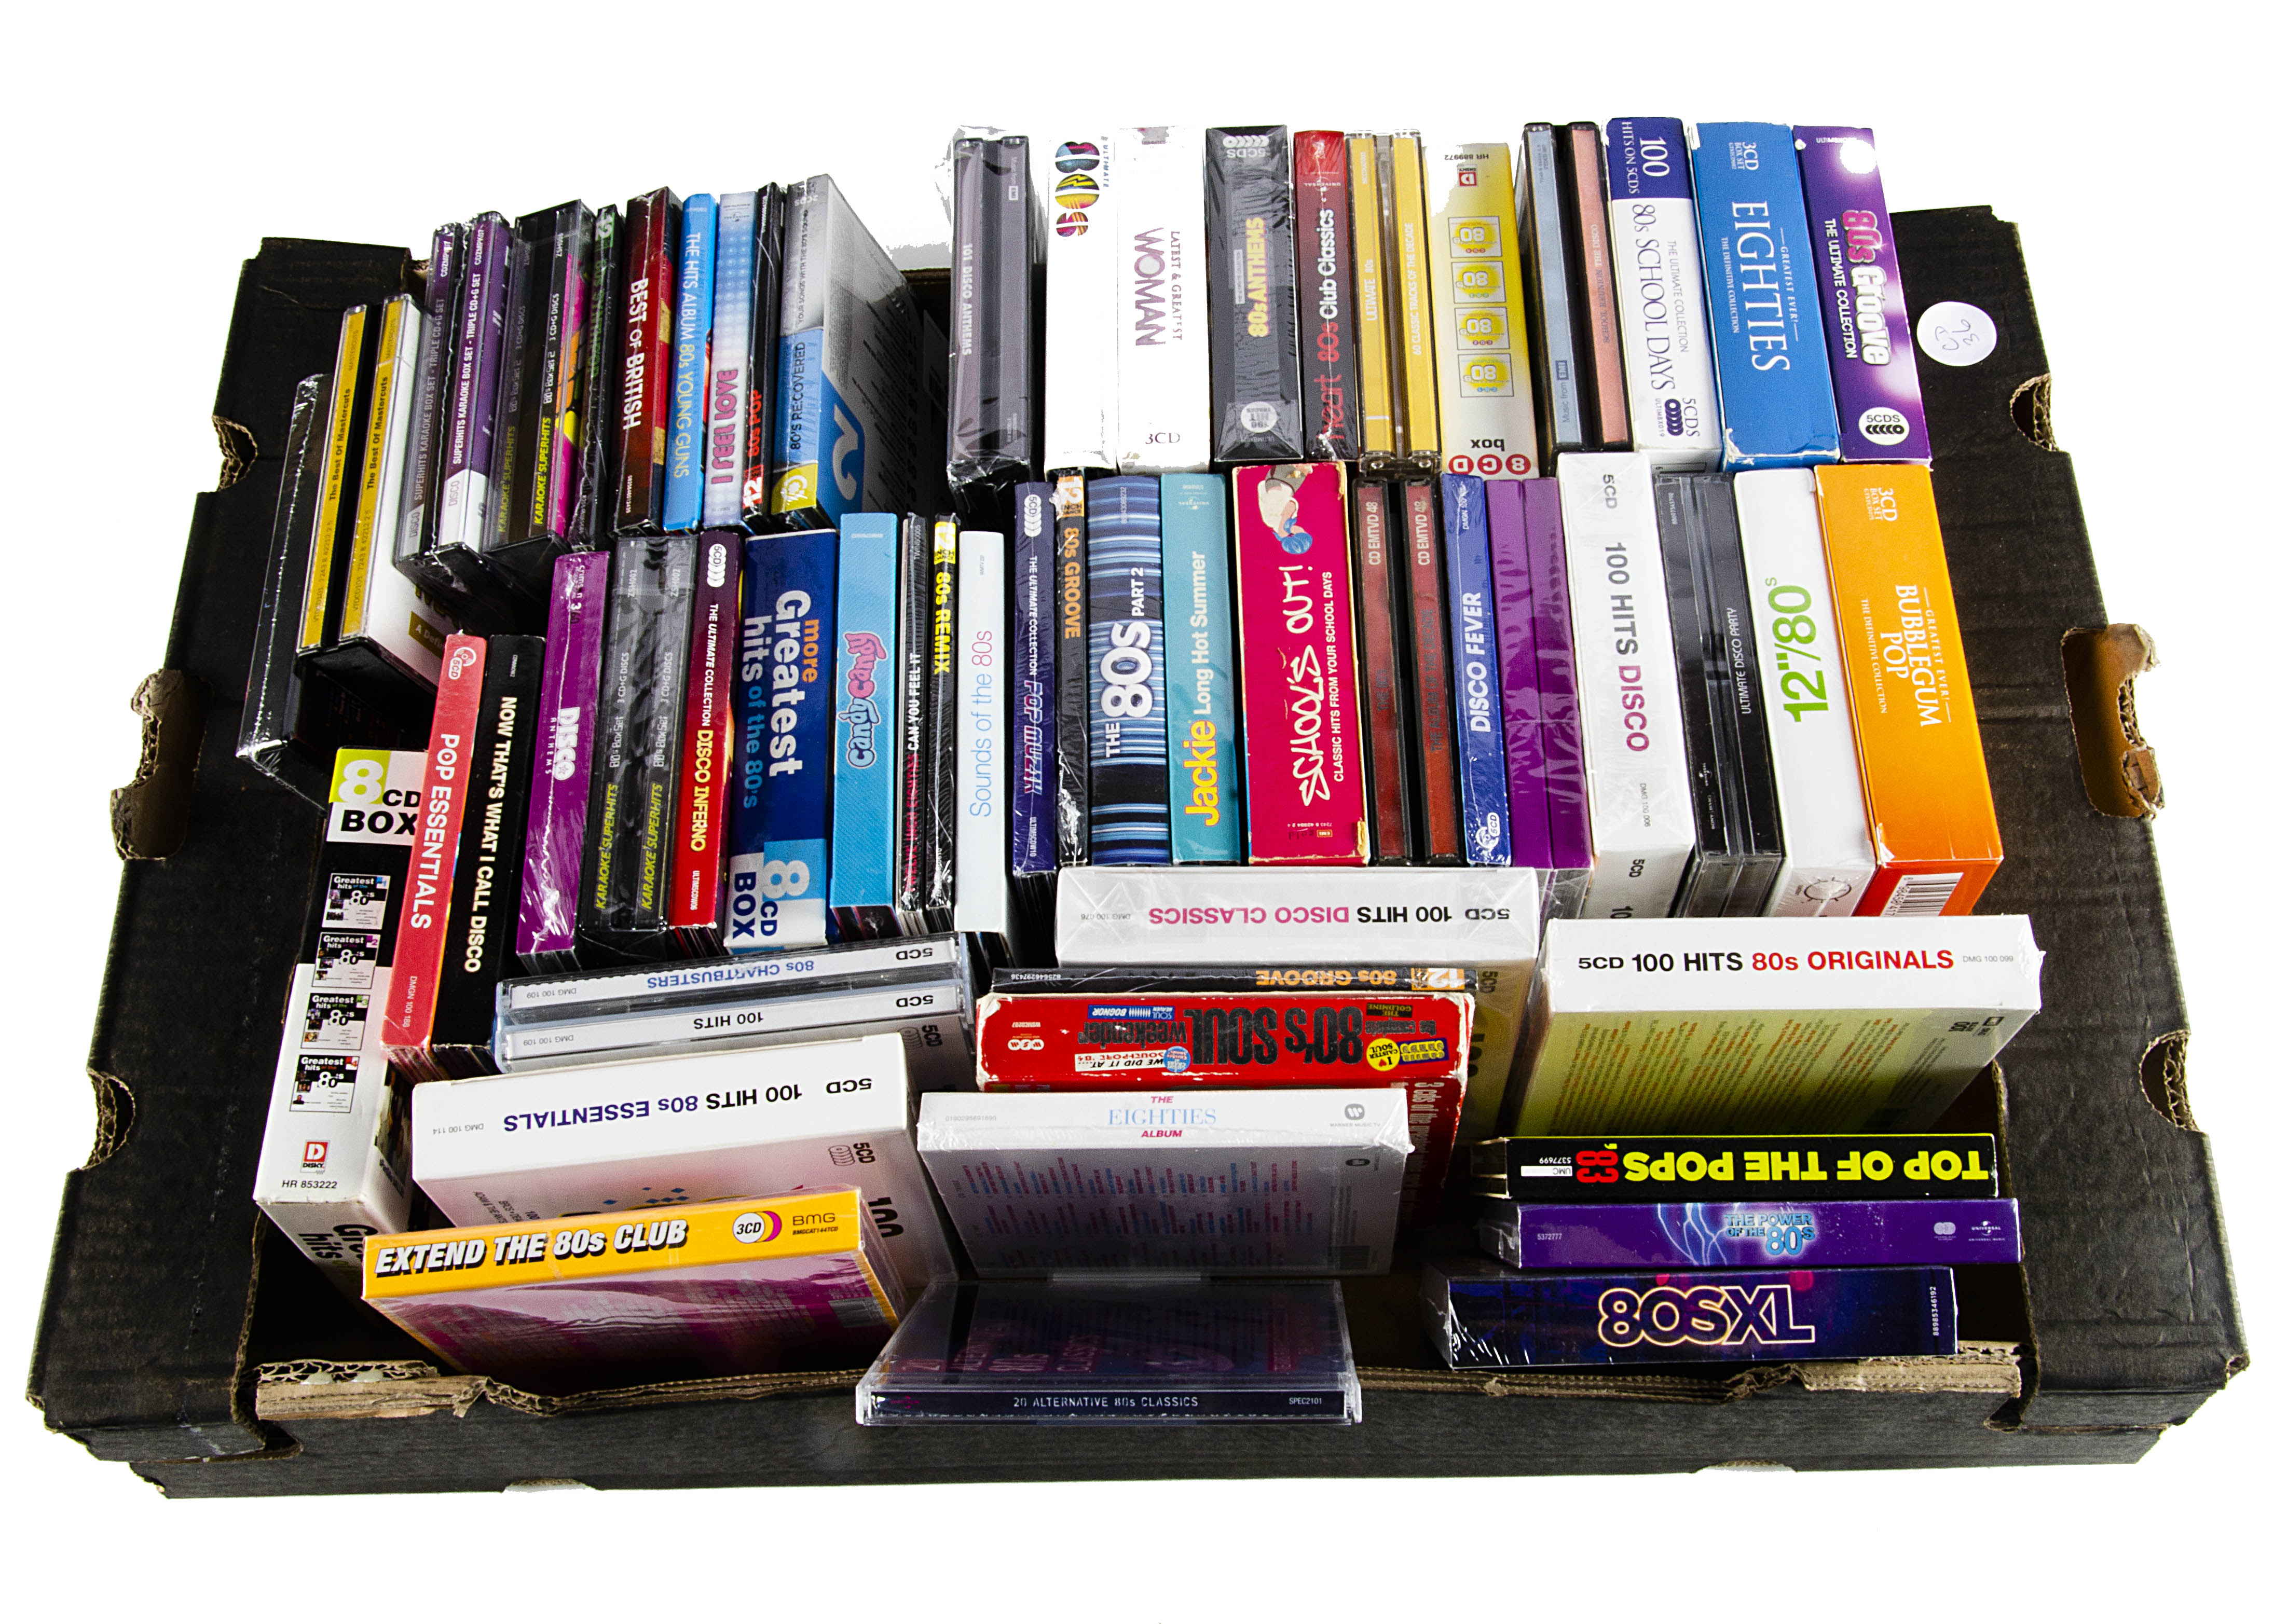 1980s CD Box Sets, approximately fifty-five Box Sets of mainly Eighties music with titles